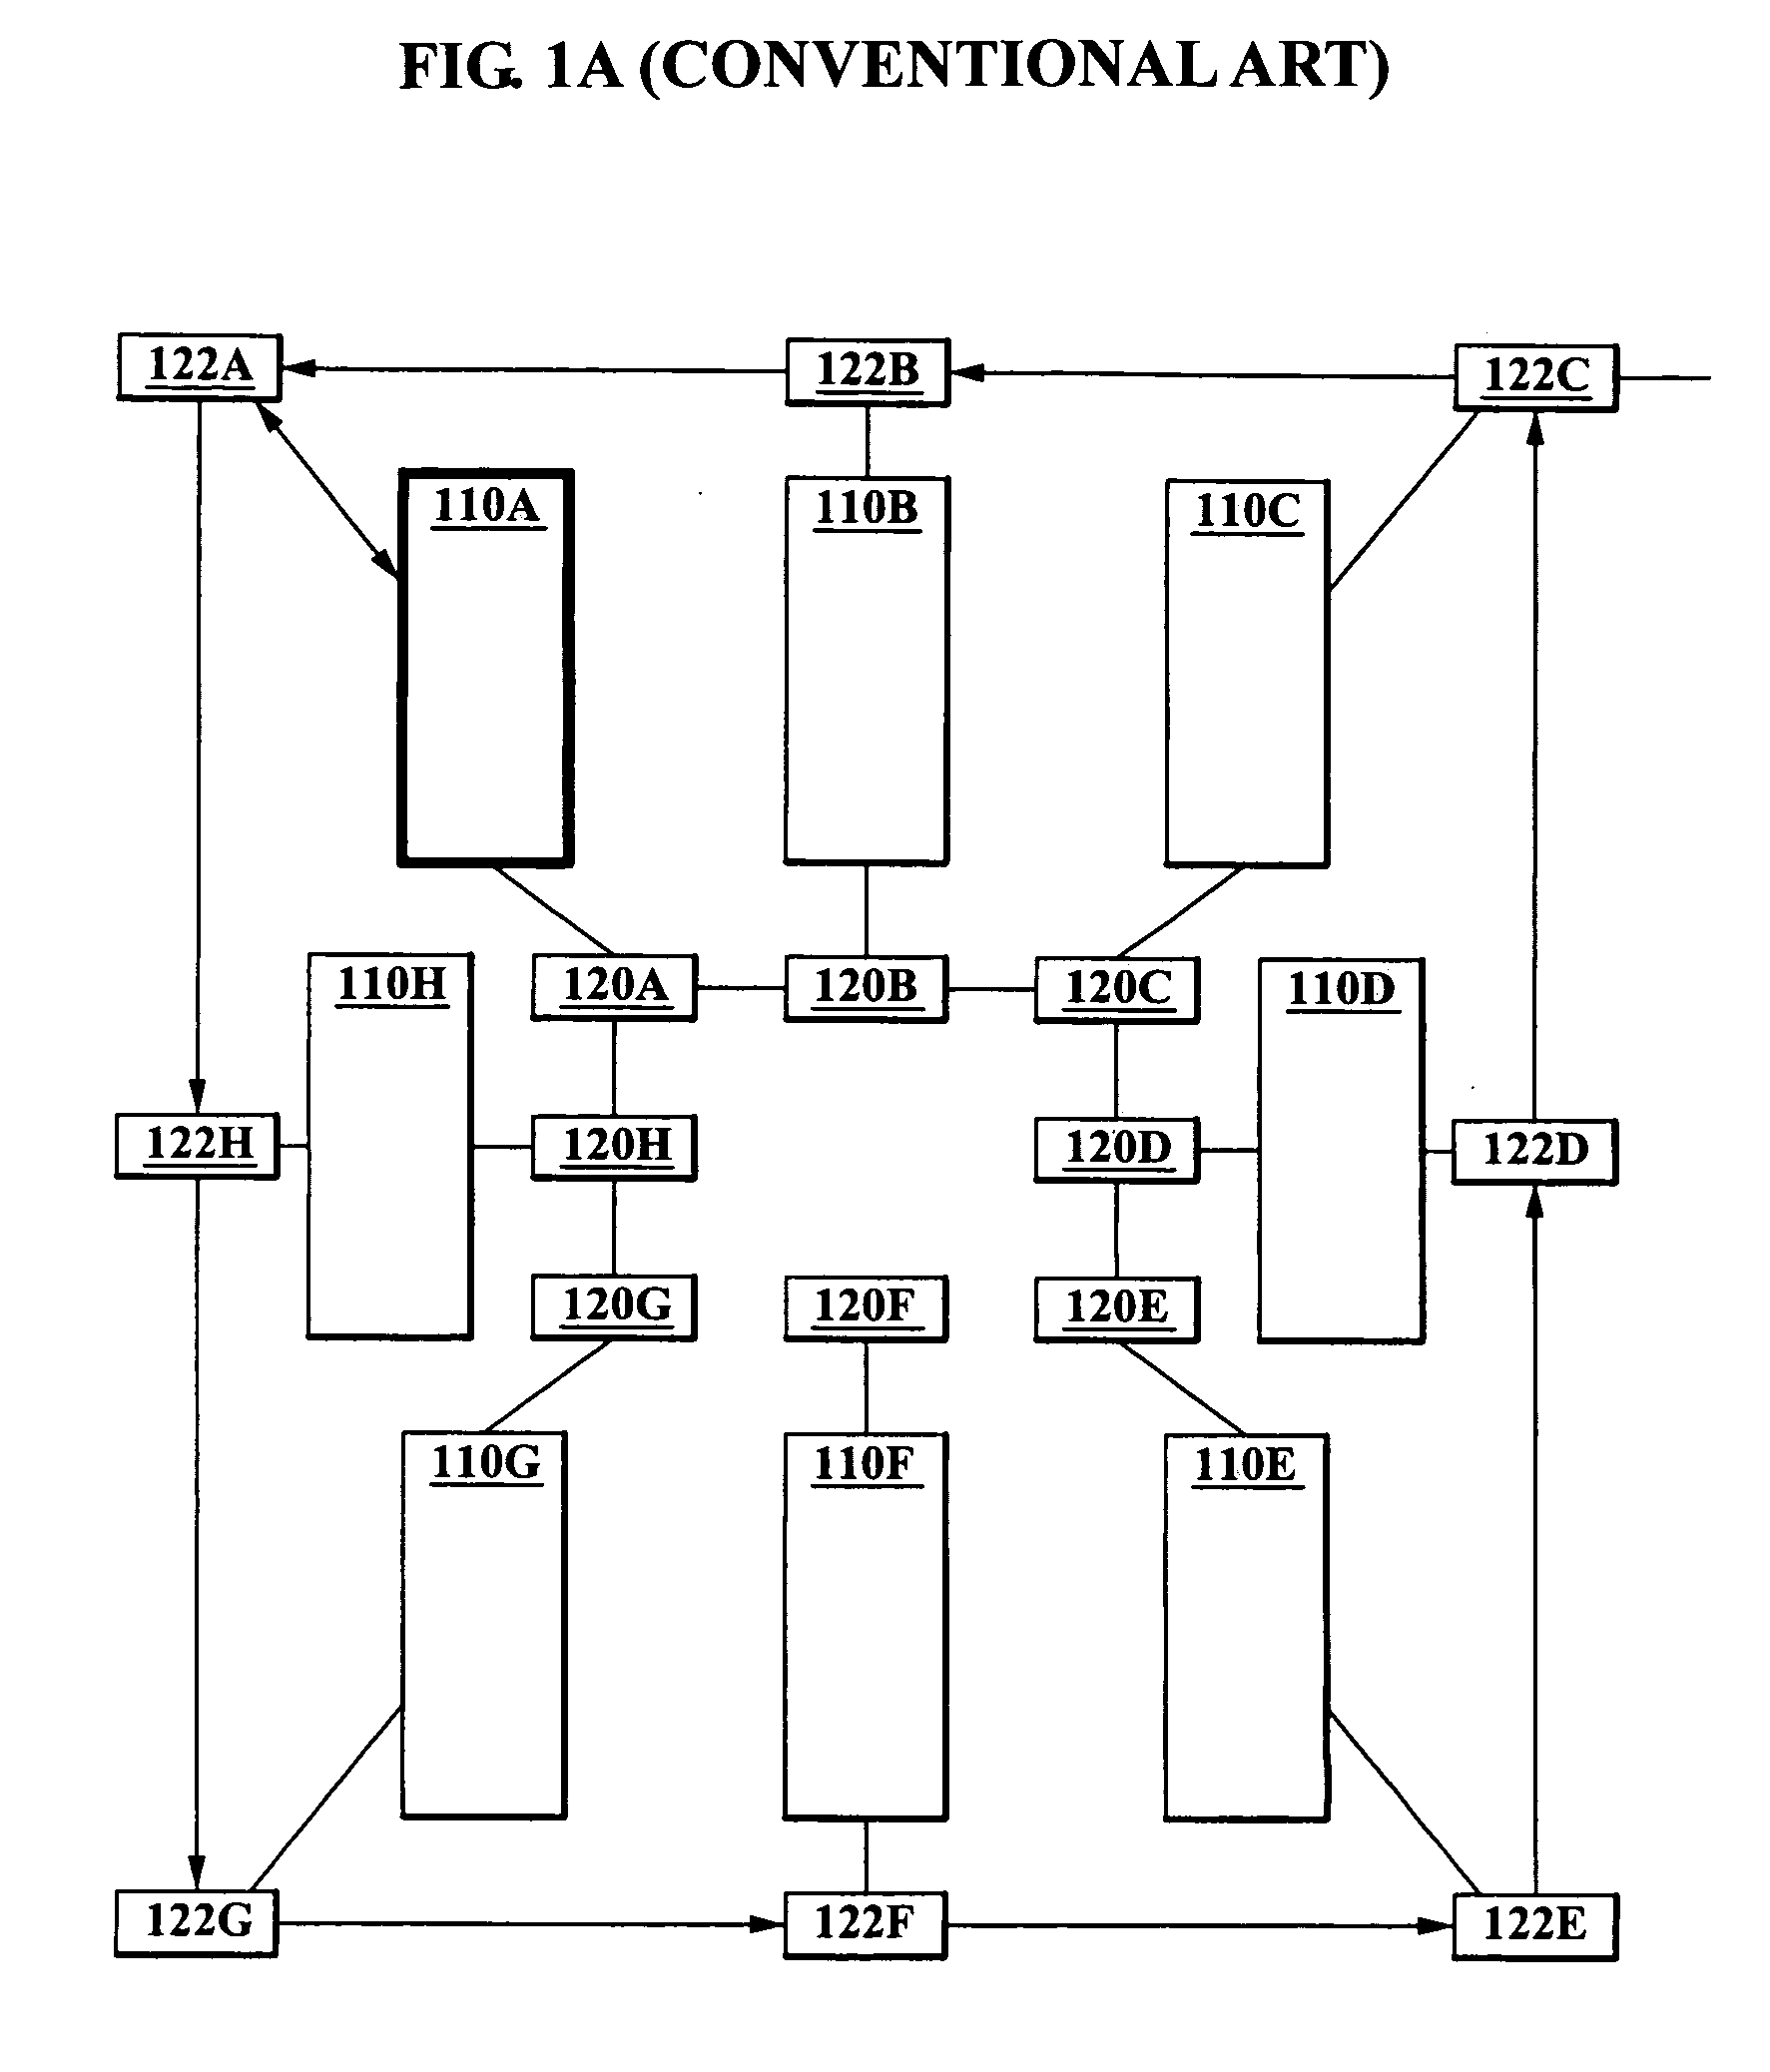 Computer chip for connecting devices on the chip utilizing star-torus topology